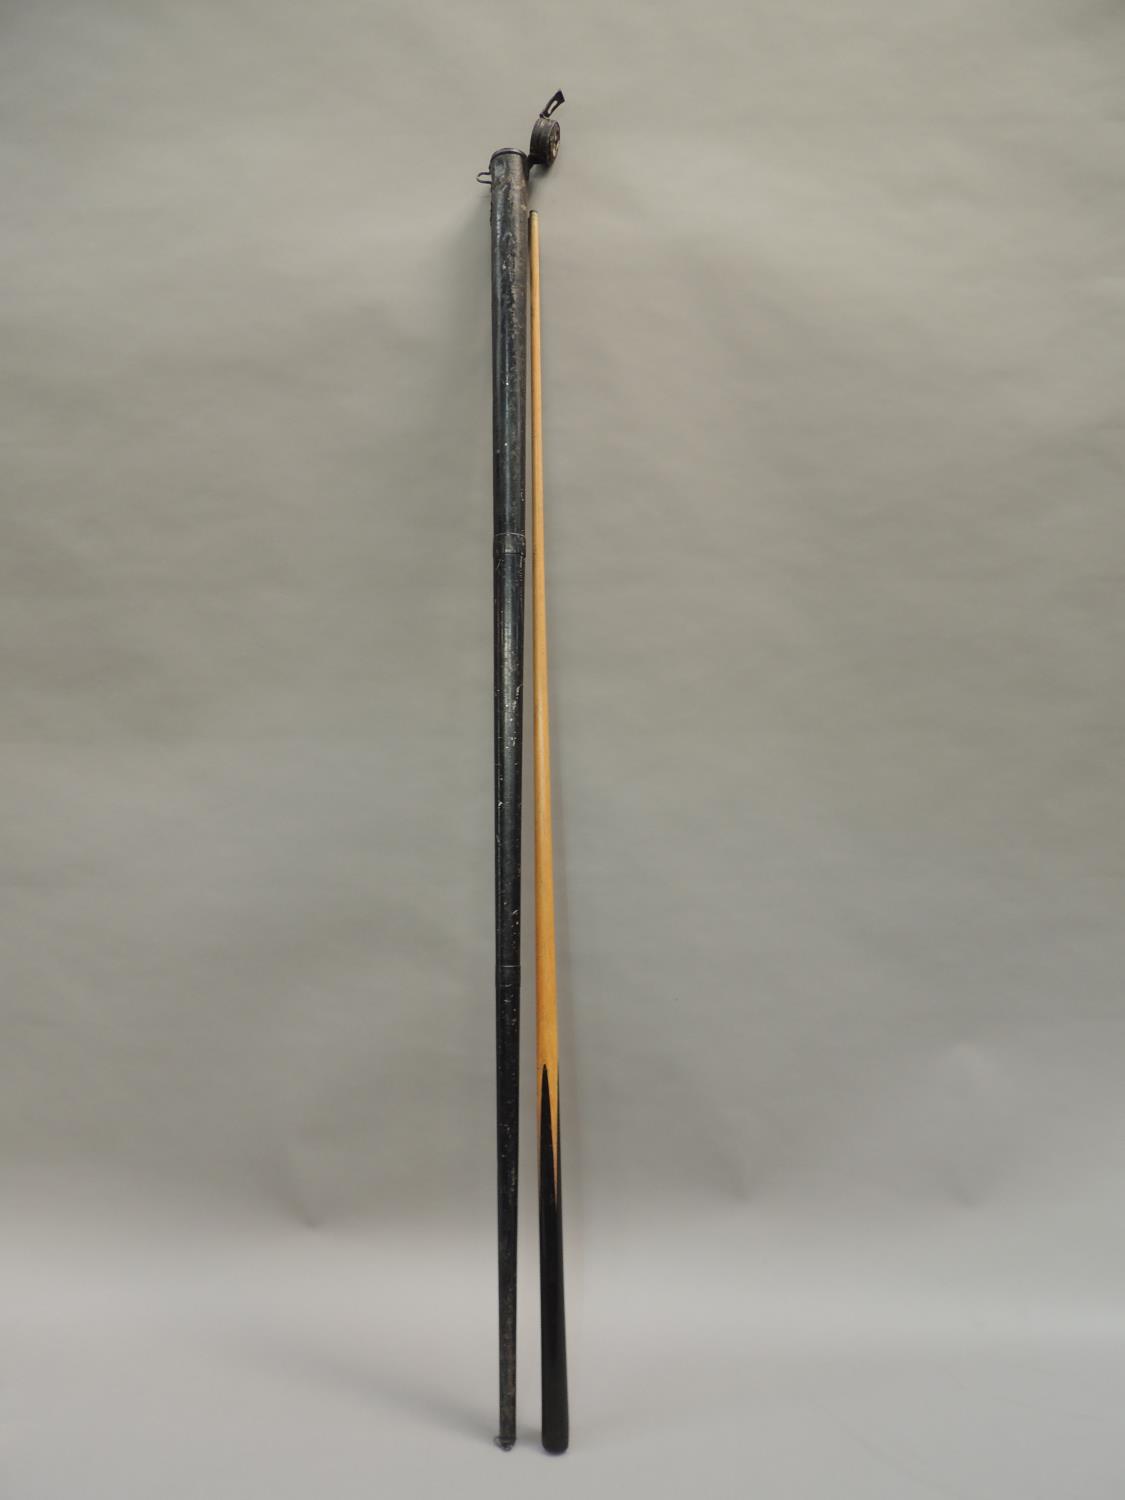 A vintage Riley, Accrington, 16oz snooker cue contained within a black Japanned metal cue case